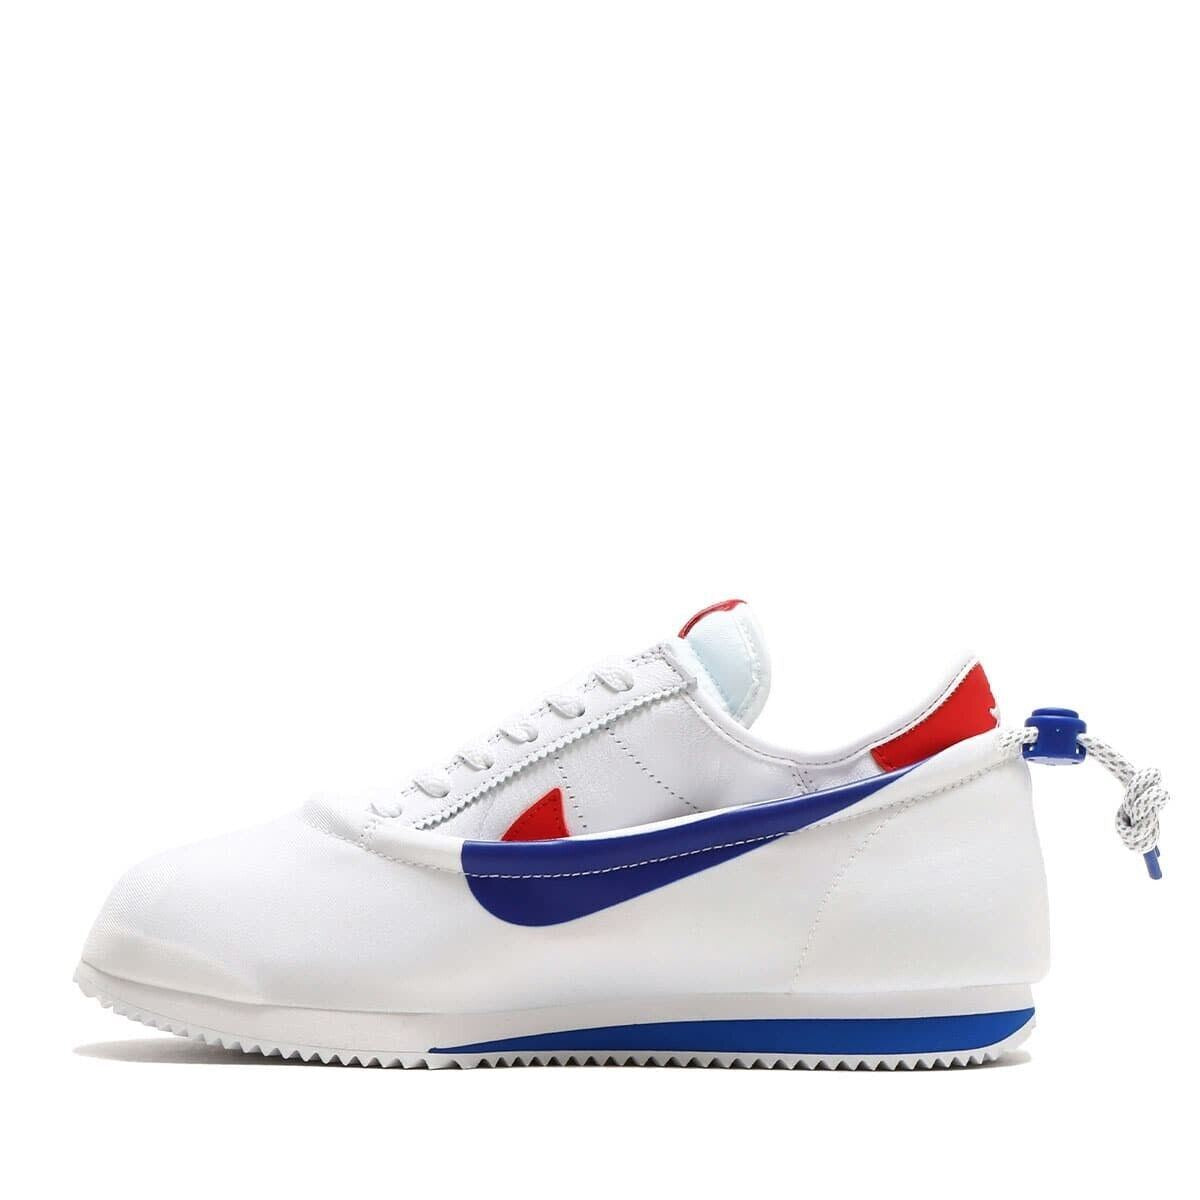 CLOT × Nike Cortez "White and Game Royal" DZ3239-100 Sneaker Appraised US6.5-12